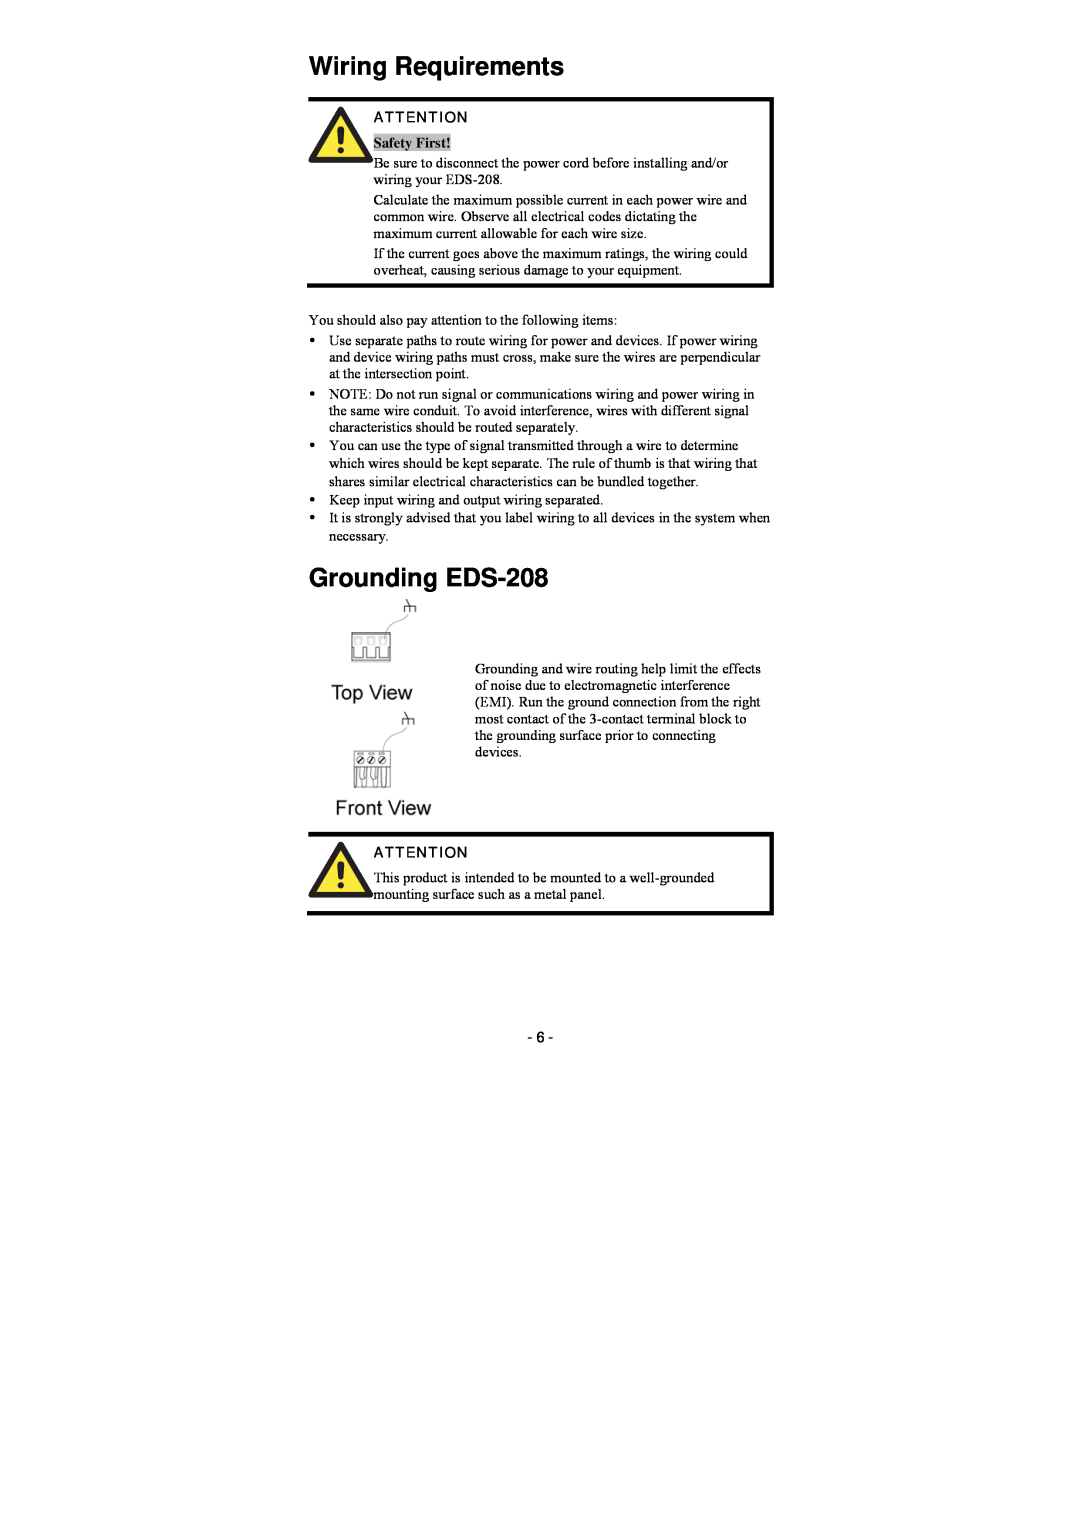 Moxa Technologies EDS-208-M-ST, EDS-208-M-SC manual Wiring Requirements, Grounding EDS-208, Safety First 